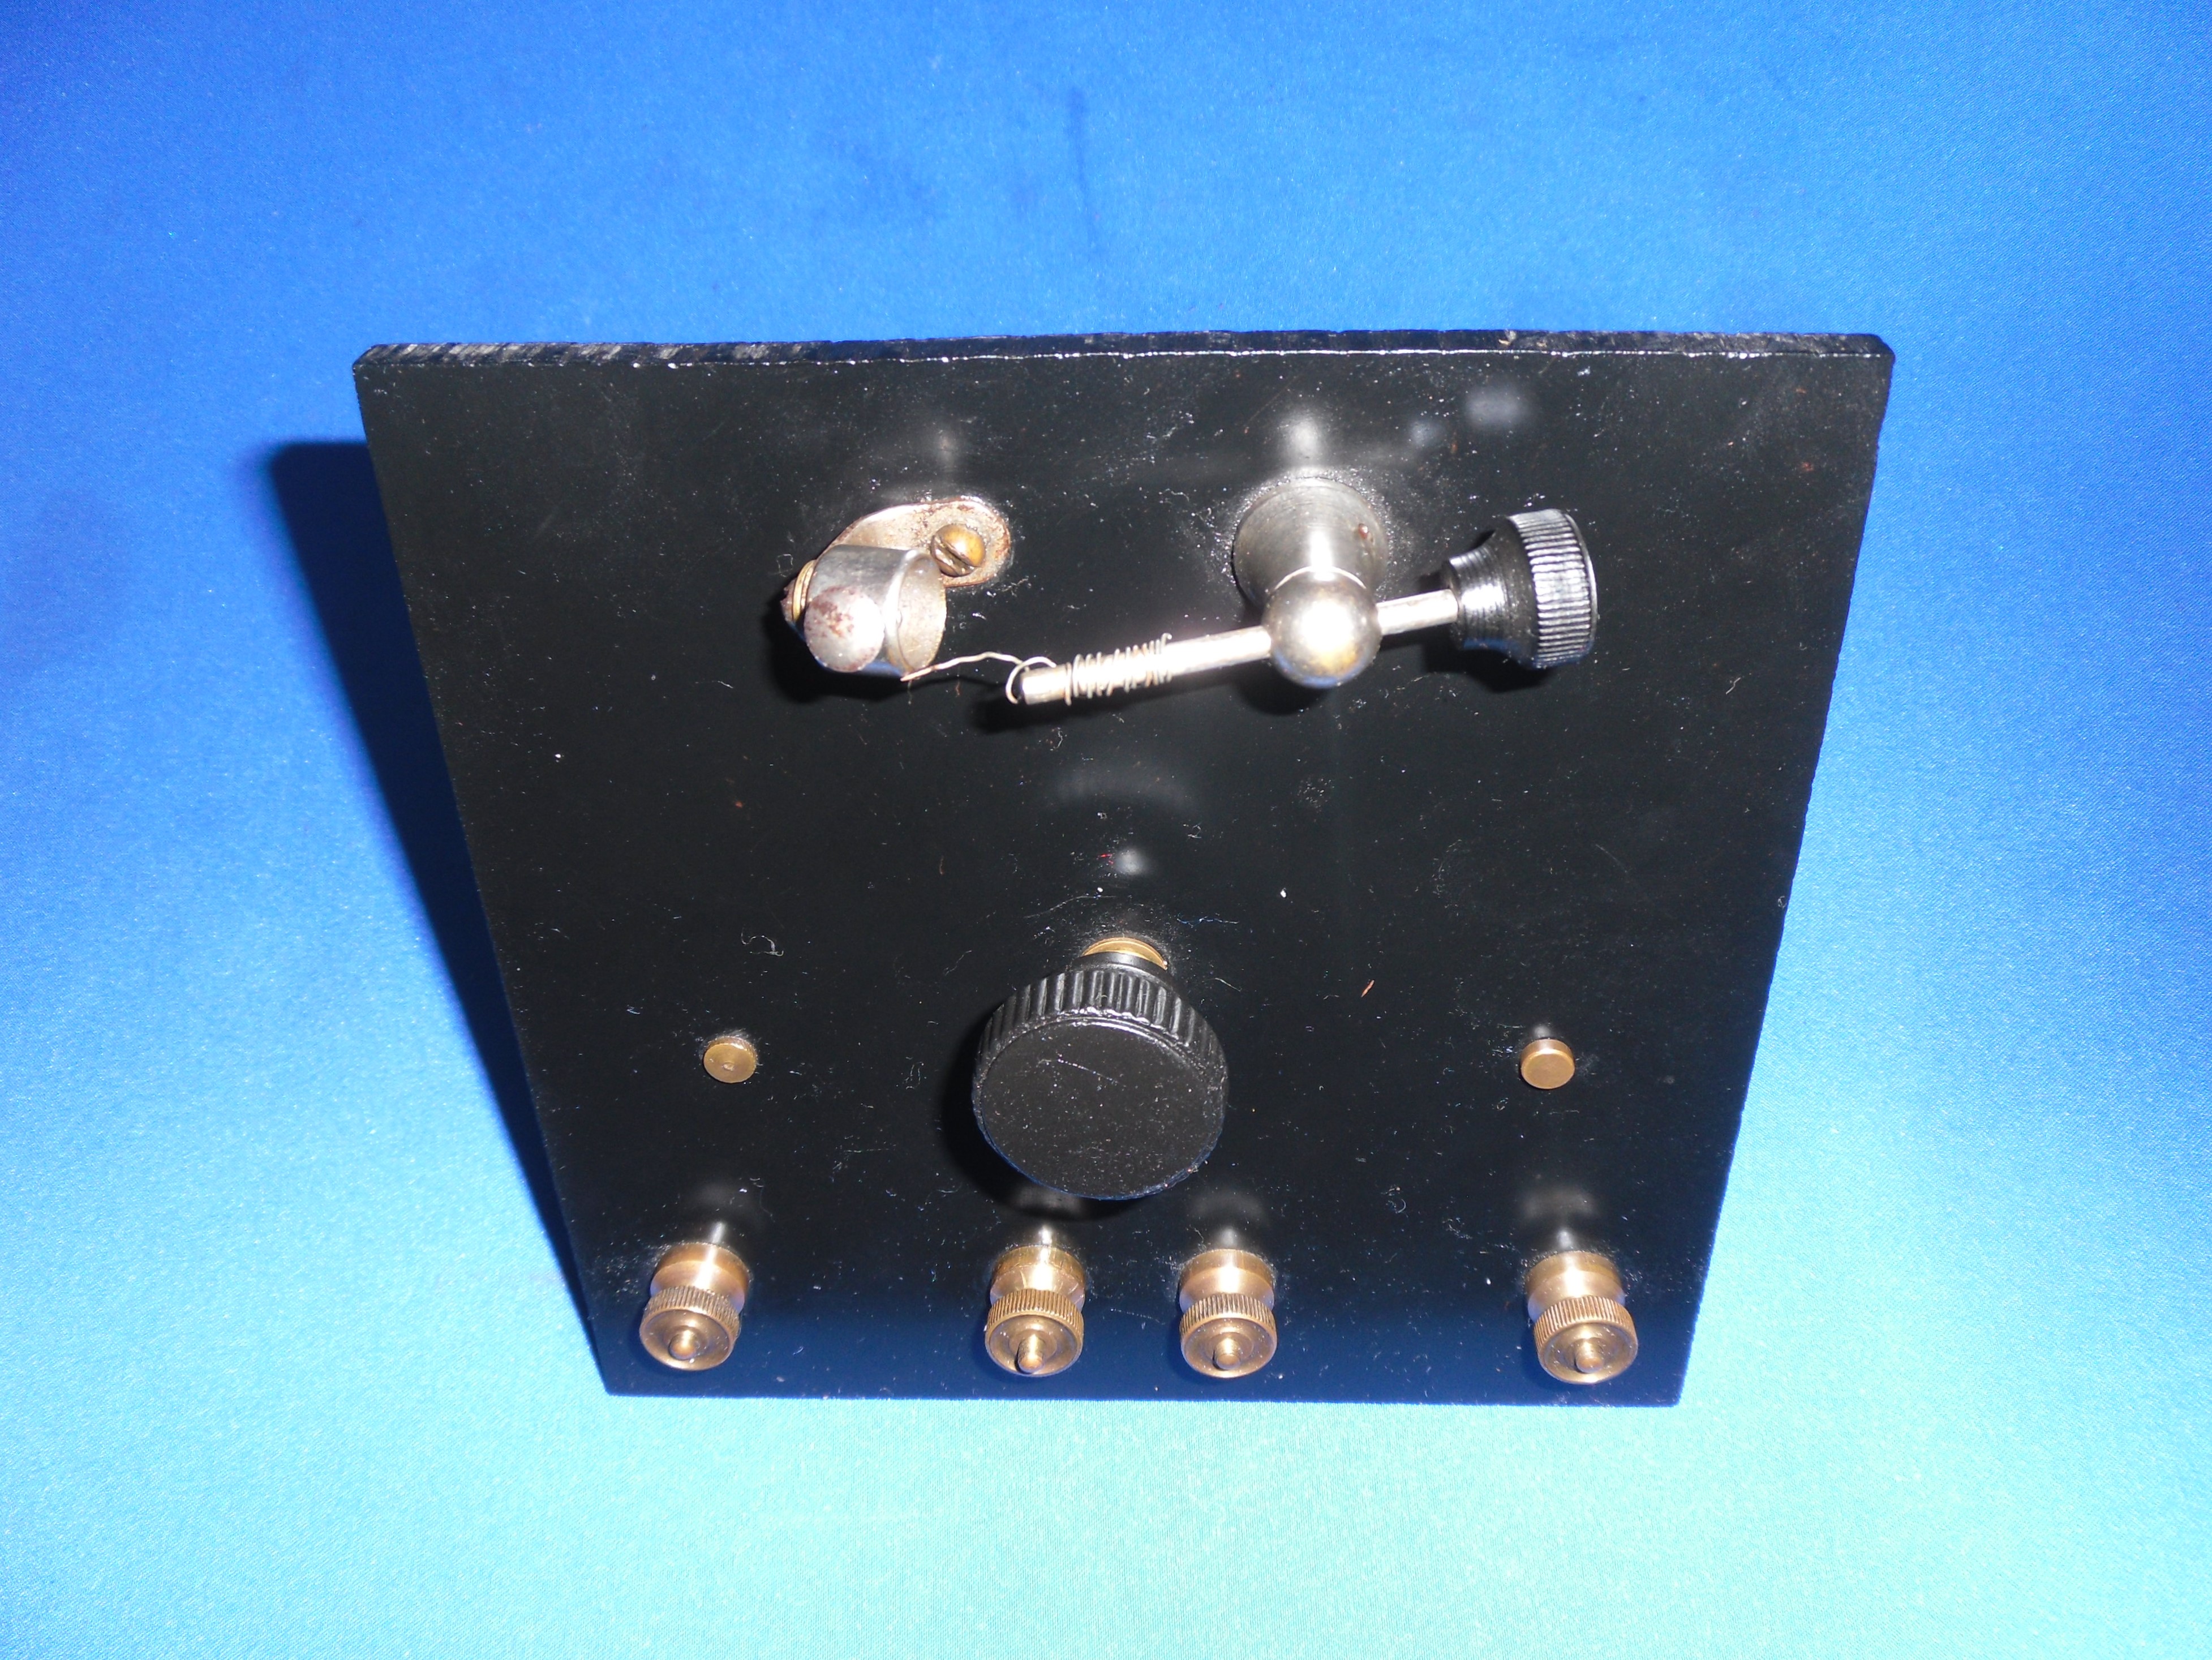 Antique Crystal Radio Believed a "The Post Office Box" Boxed Dr CECIL Crystal - Image 3 of 8